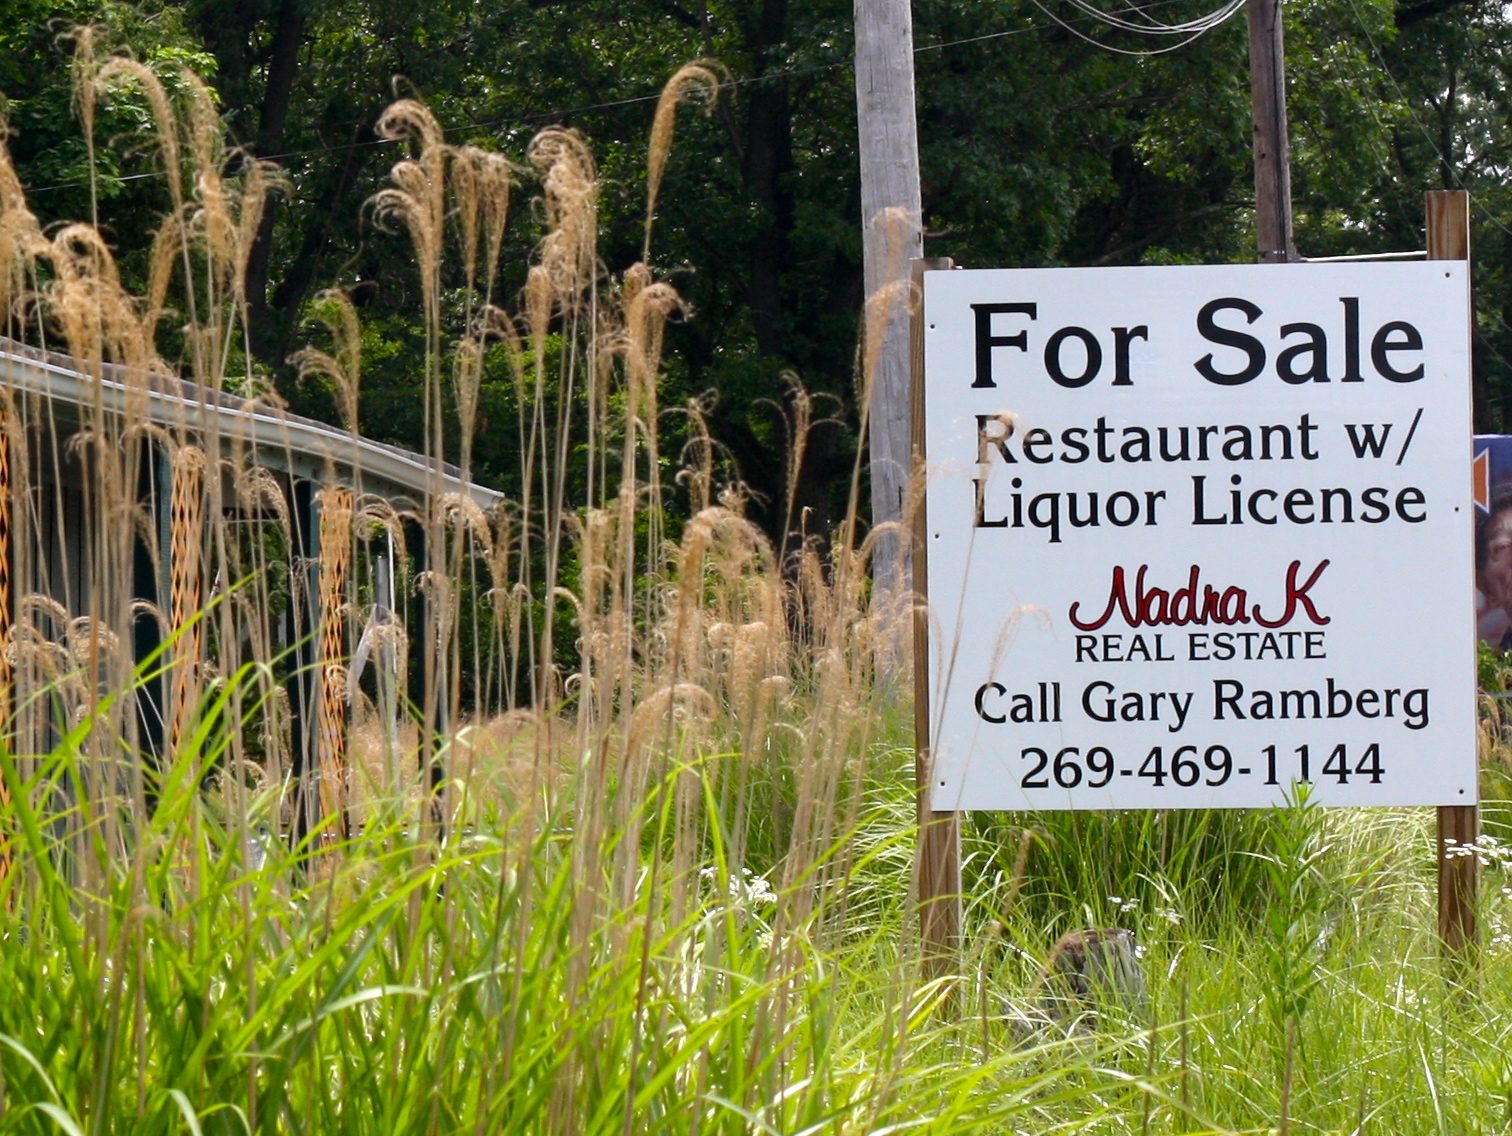 For Sale Sign in Grass